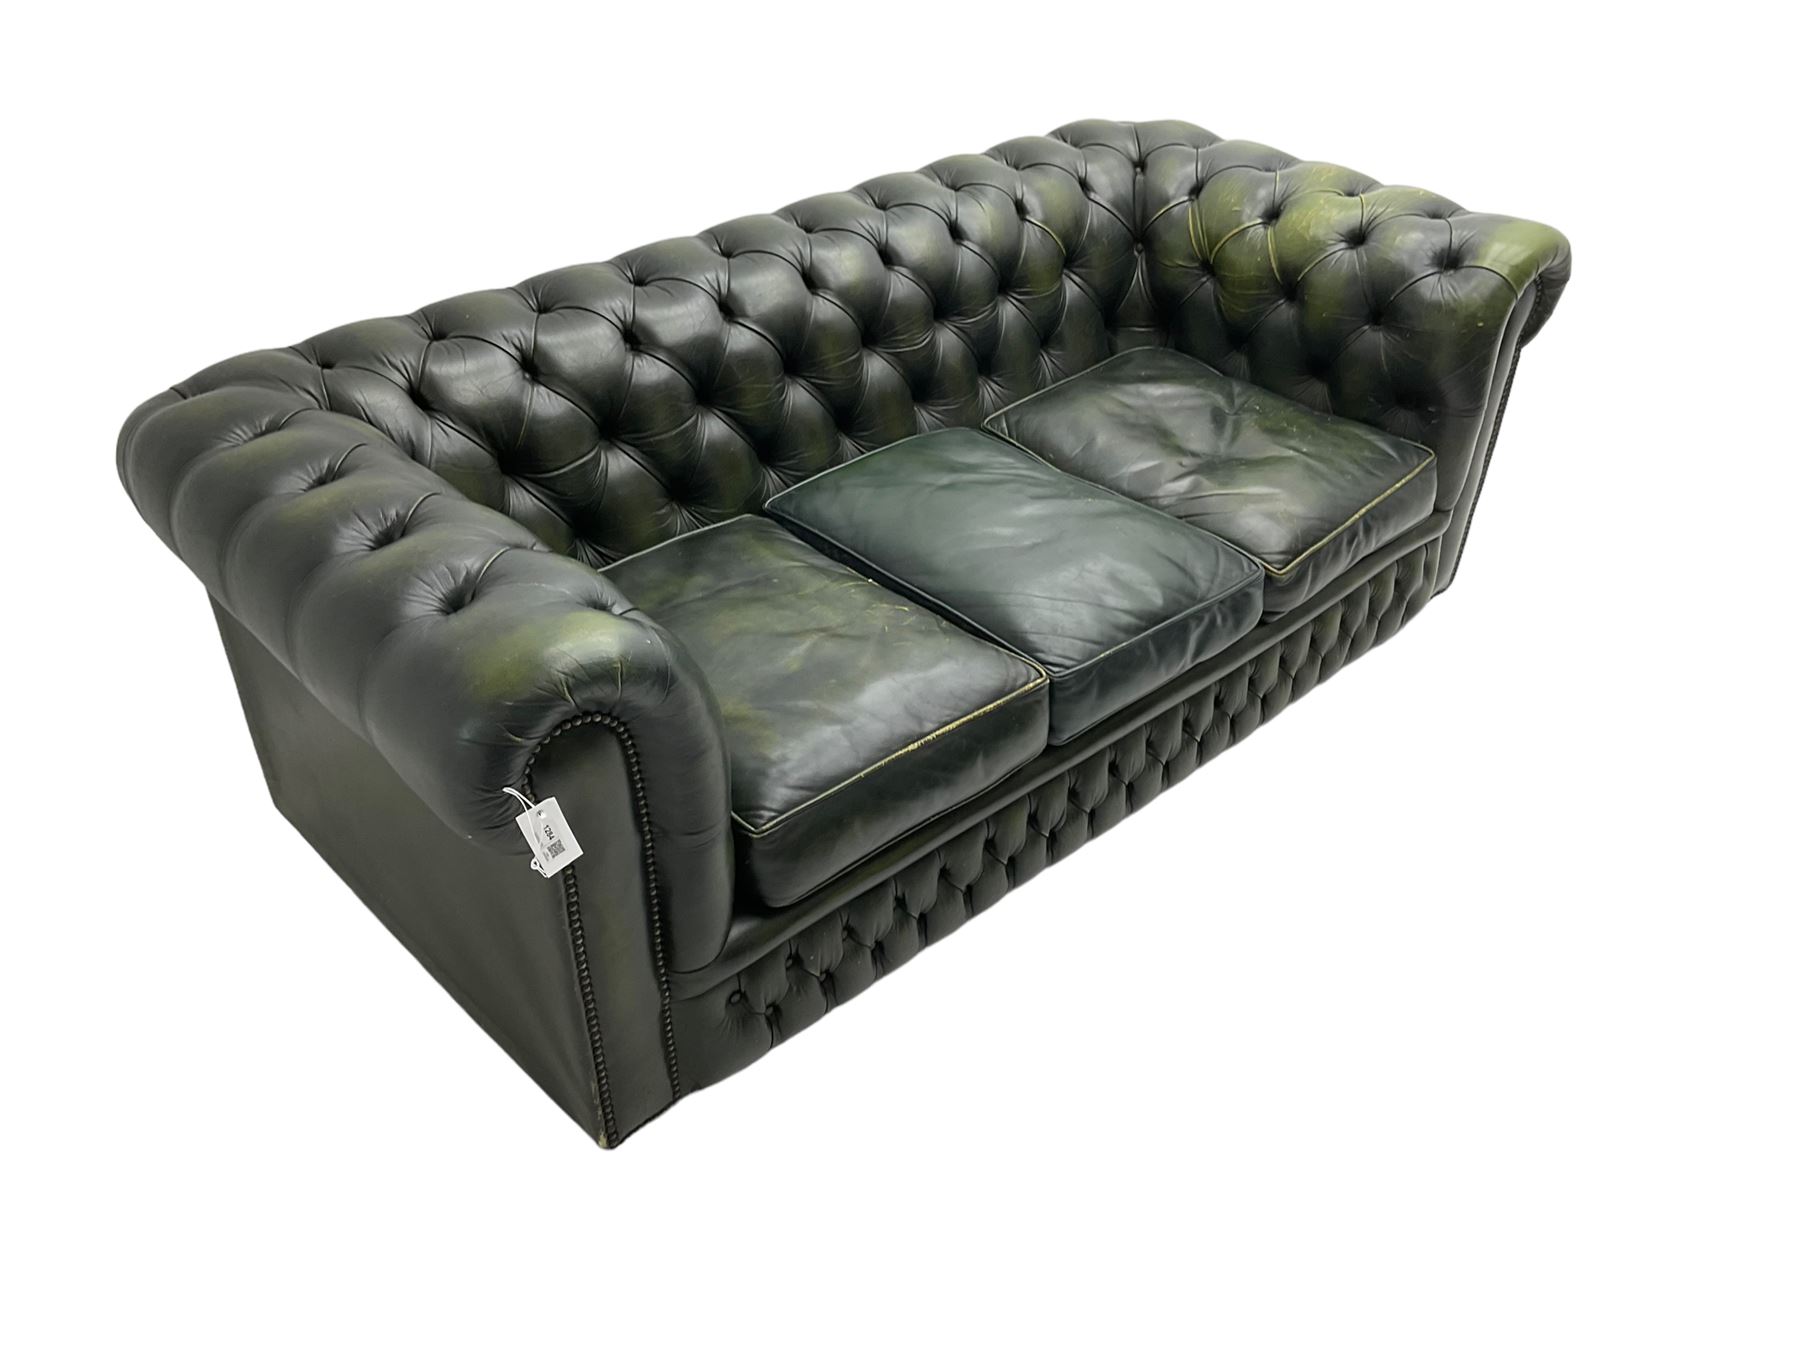 Chesterfield three seat sofa - Image 6 of 7